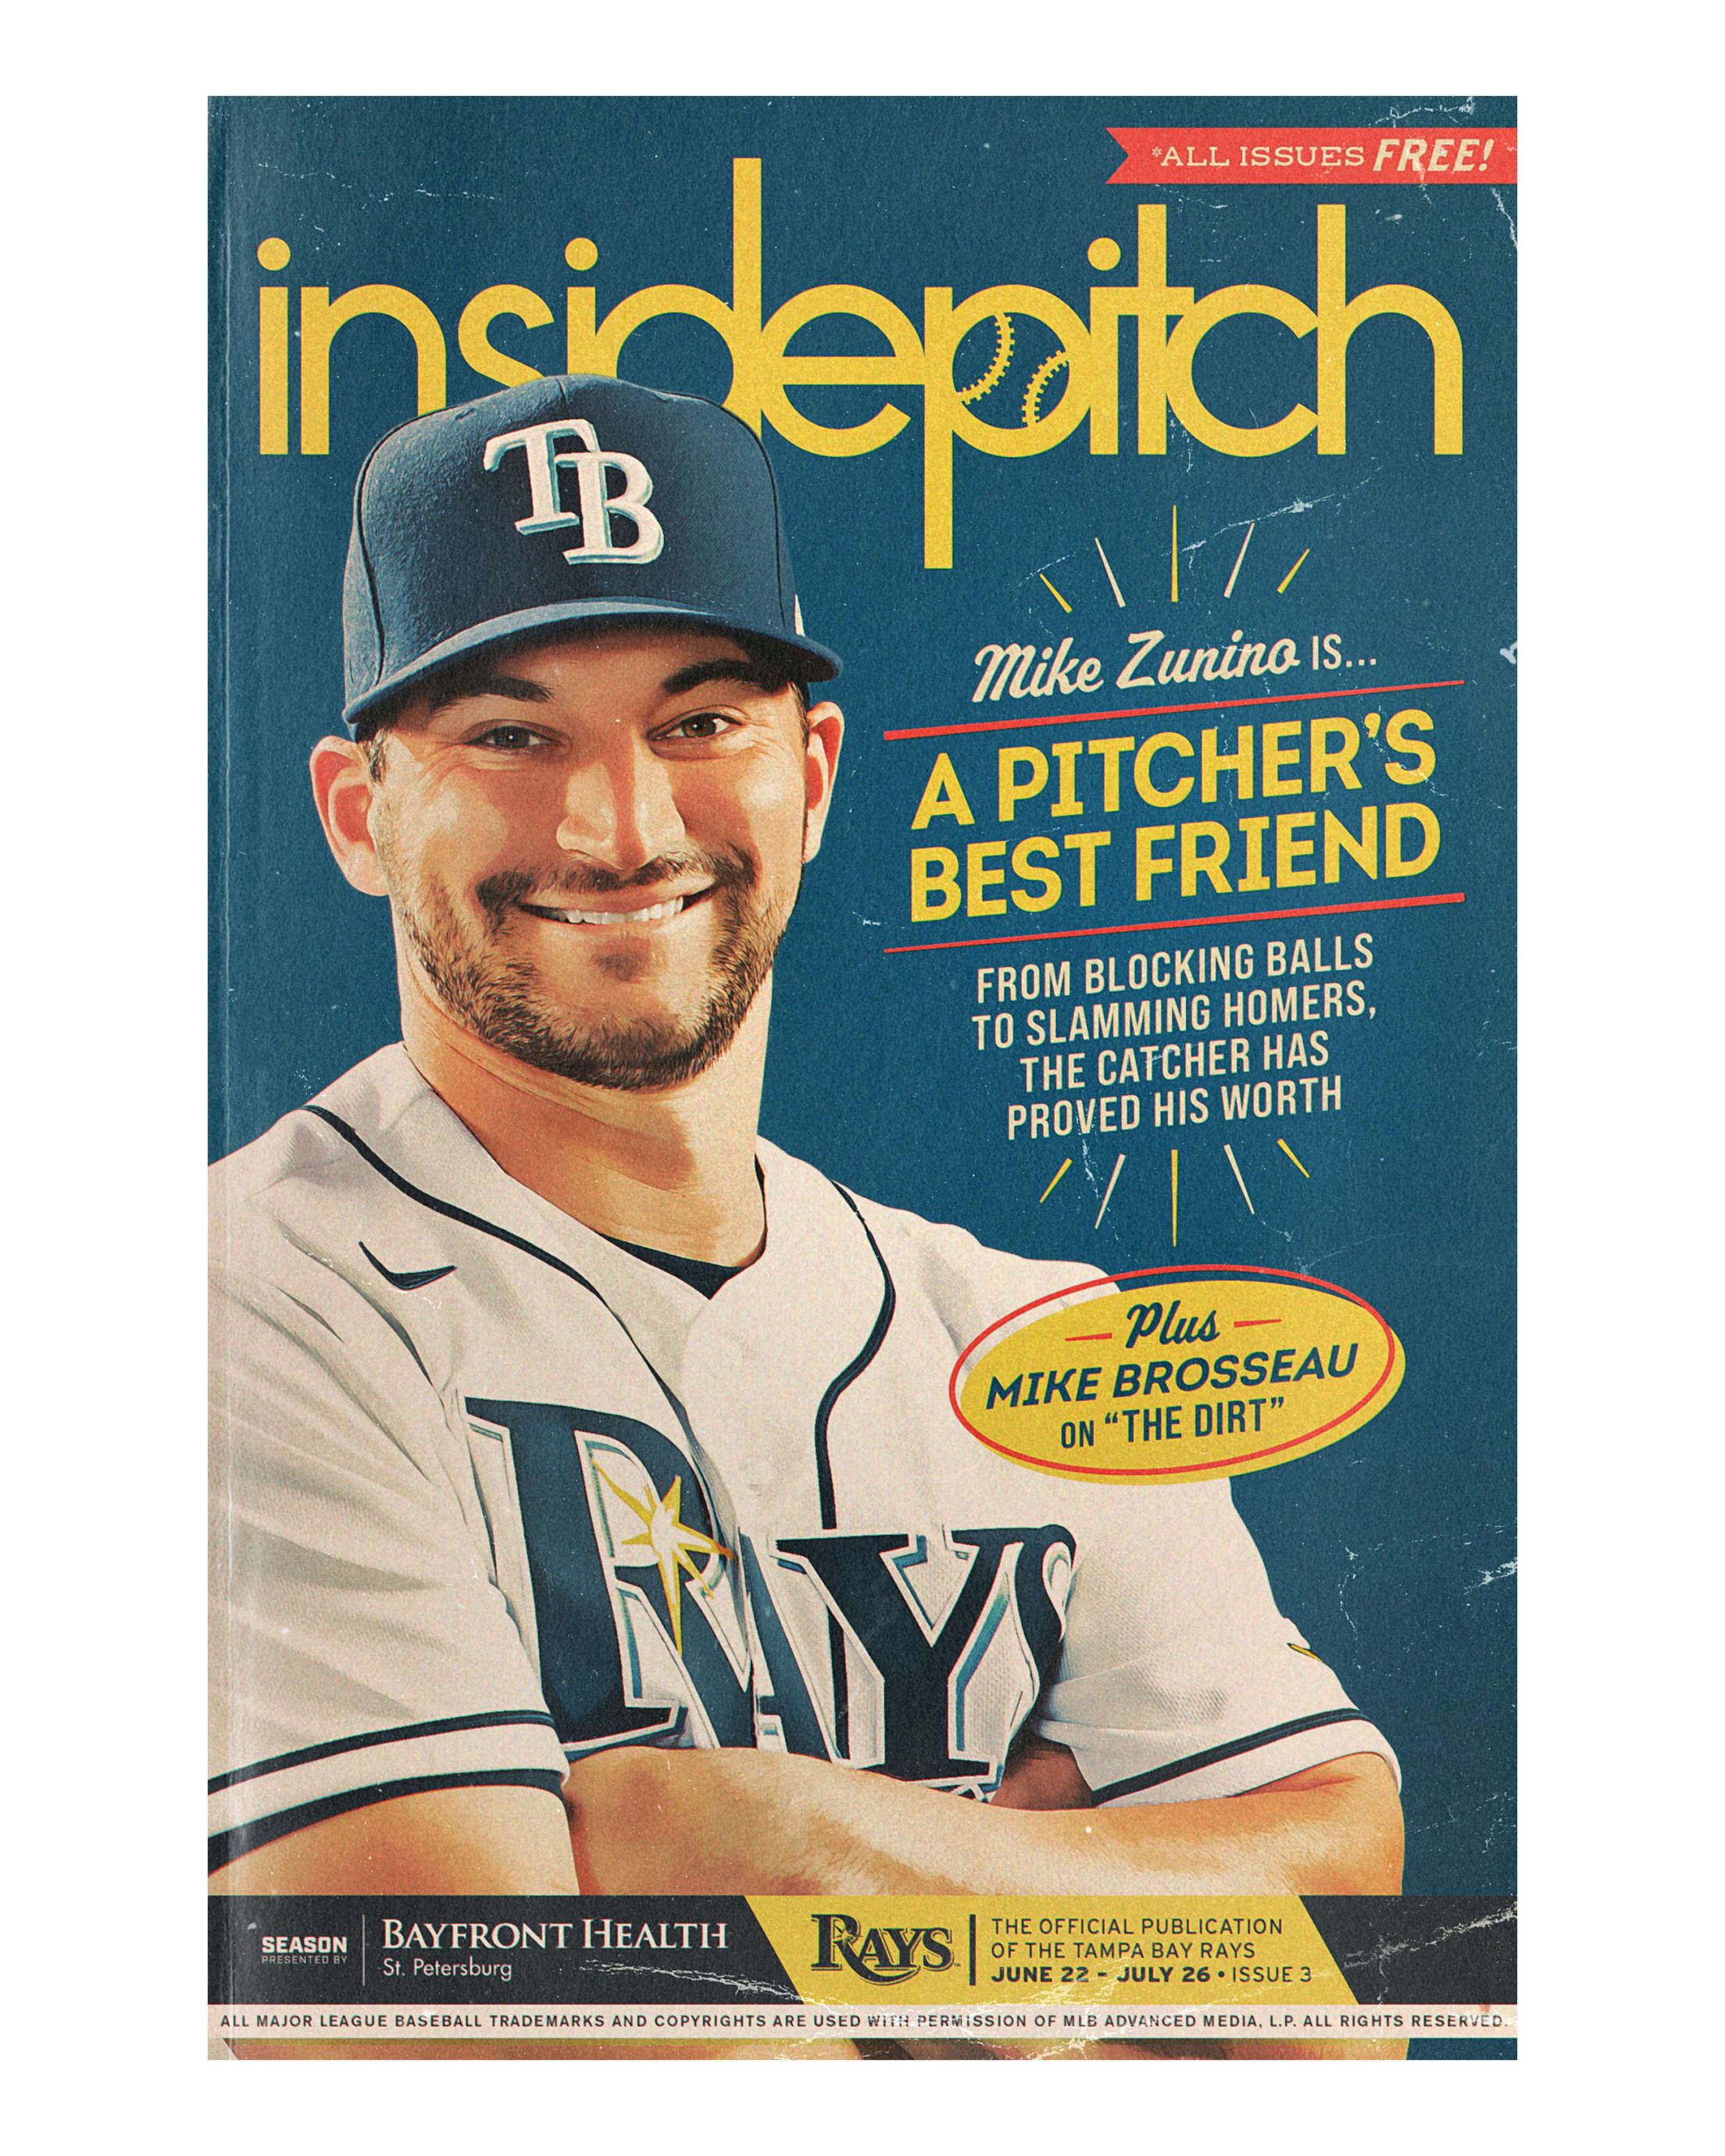 Tampa Bay Rays Refresh by Michael Danger on Dribbble